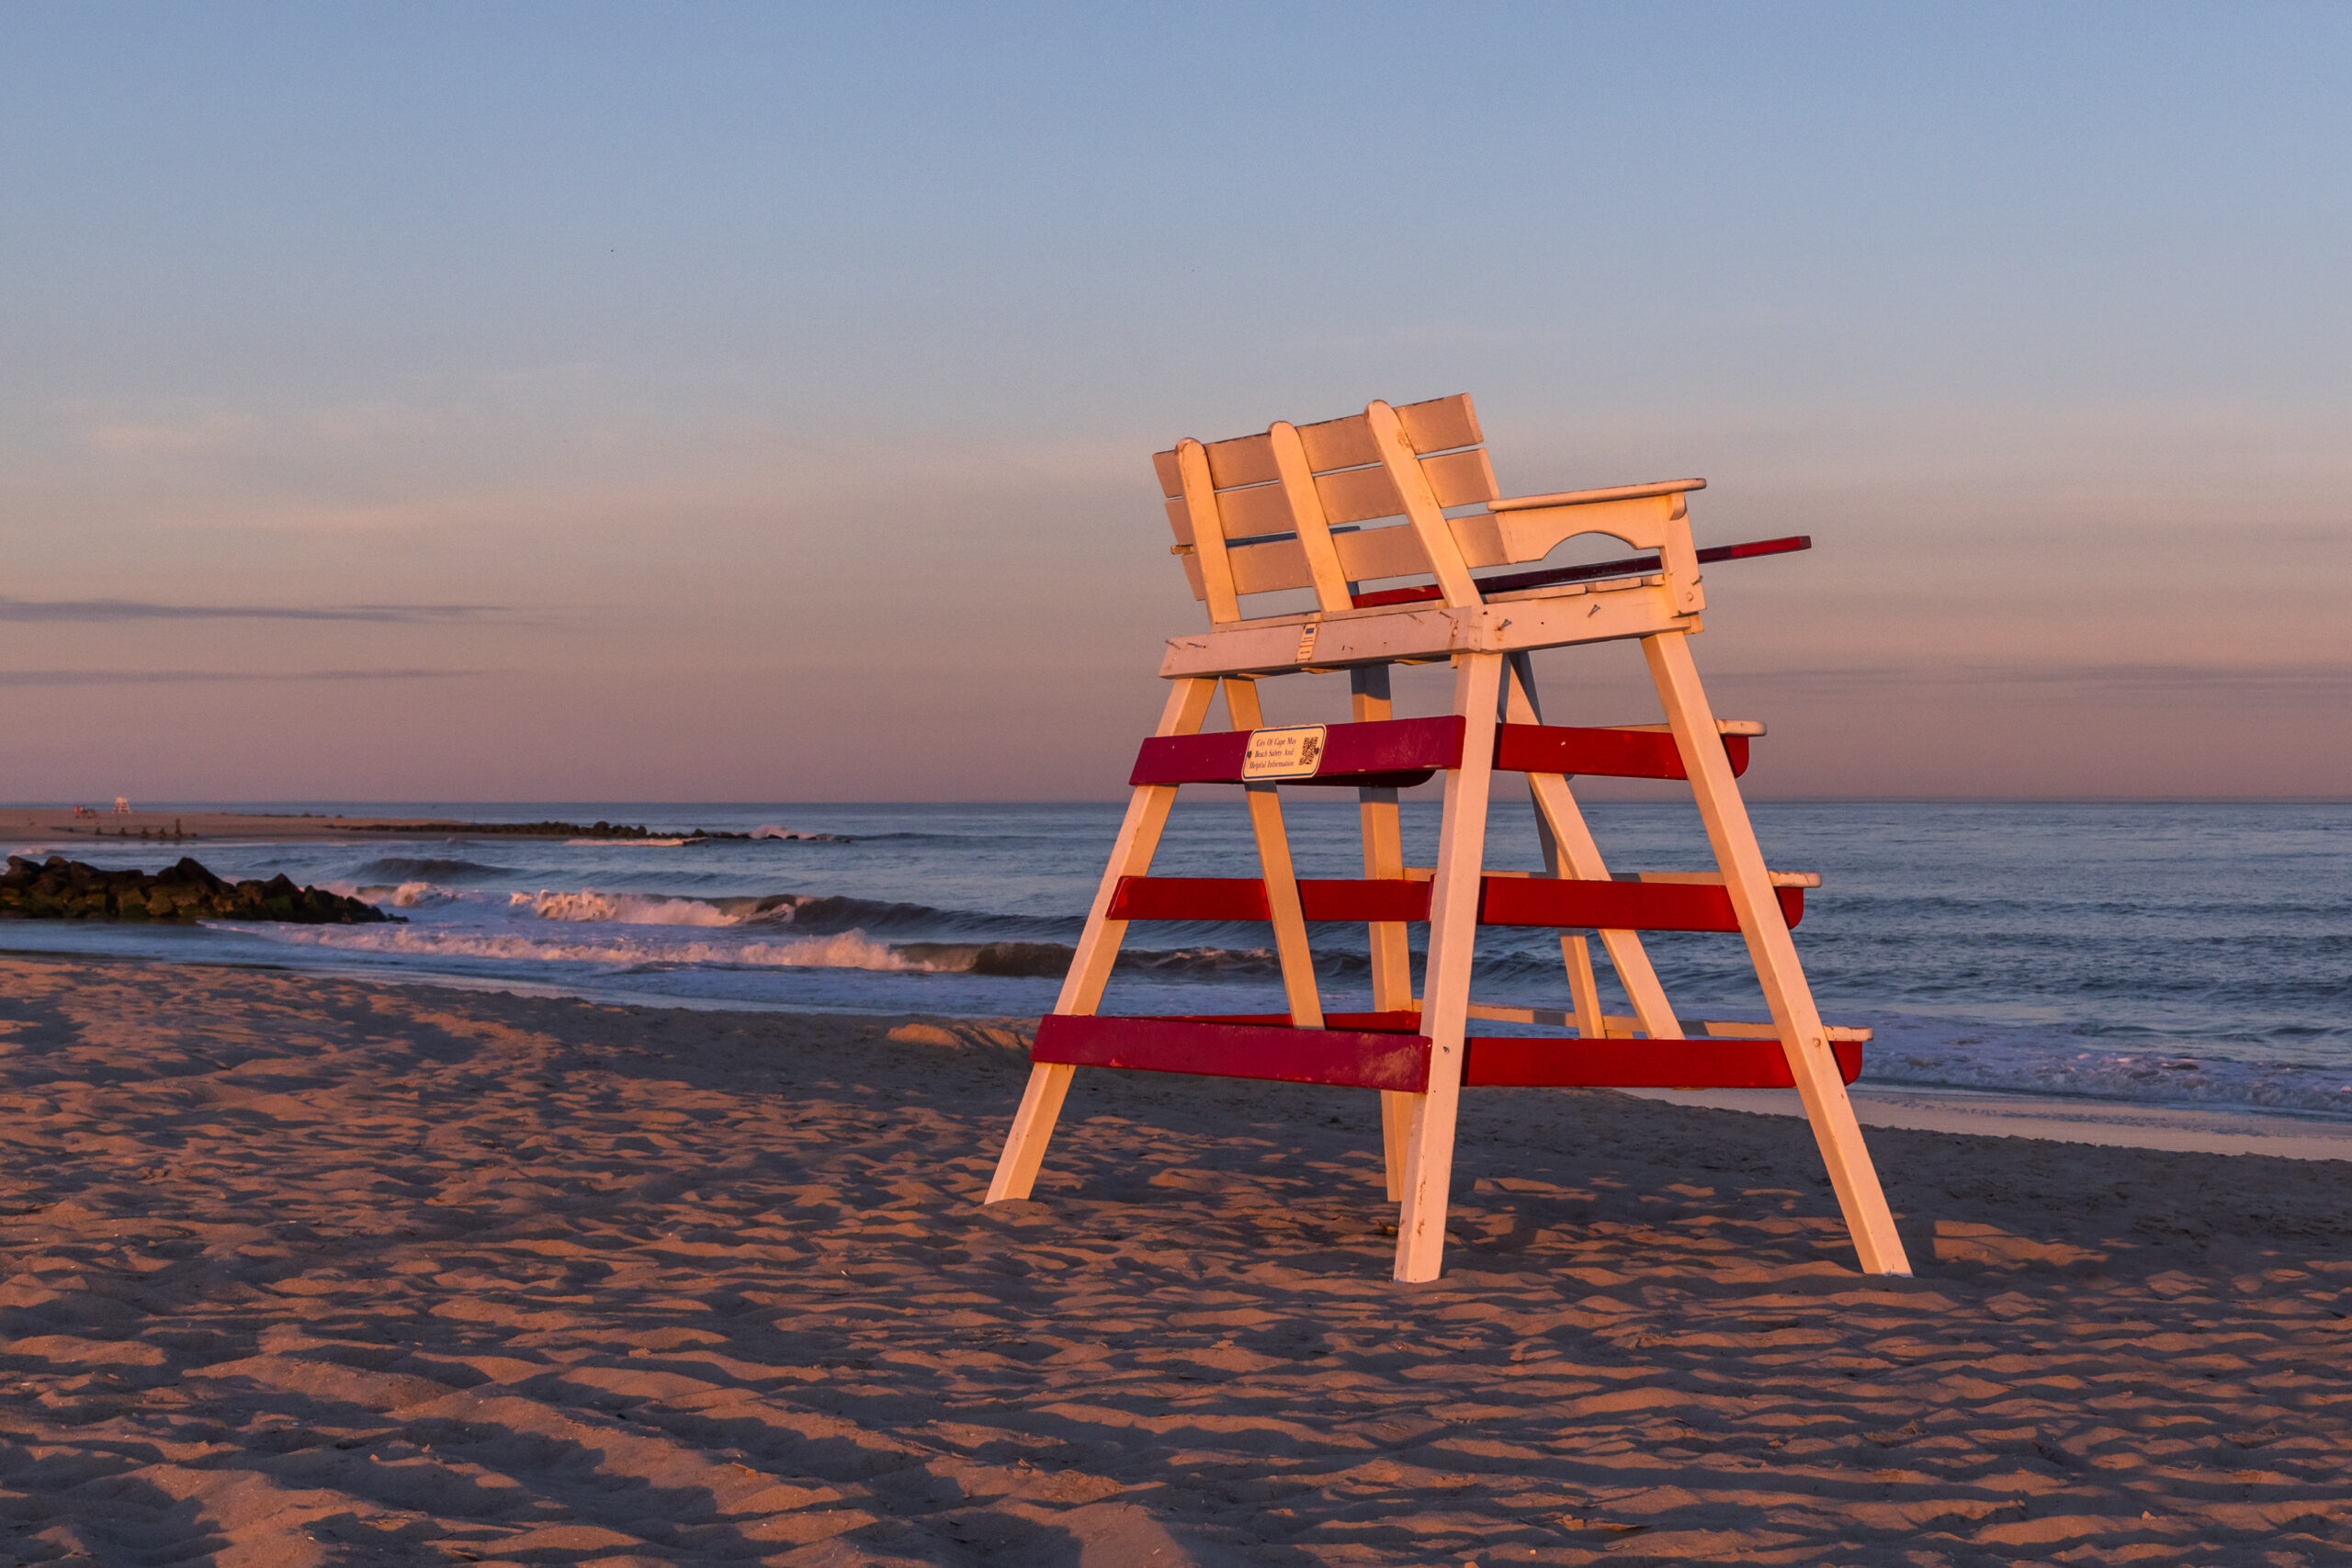 A red and white lifeguard stand on the beach at sunset with waves crashing in the ocean